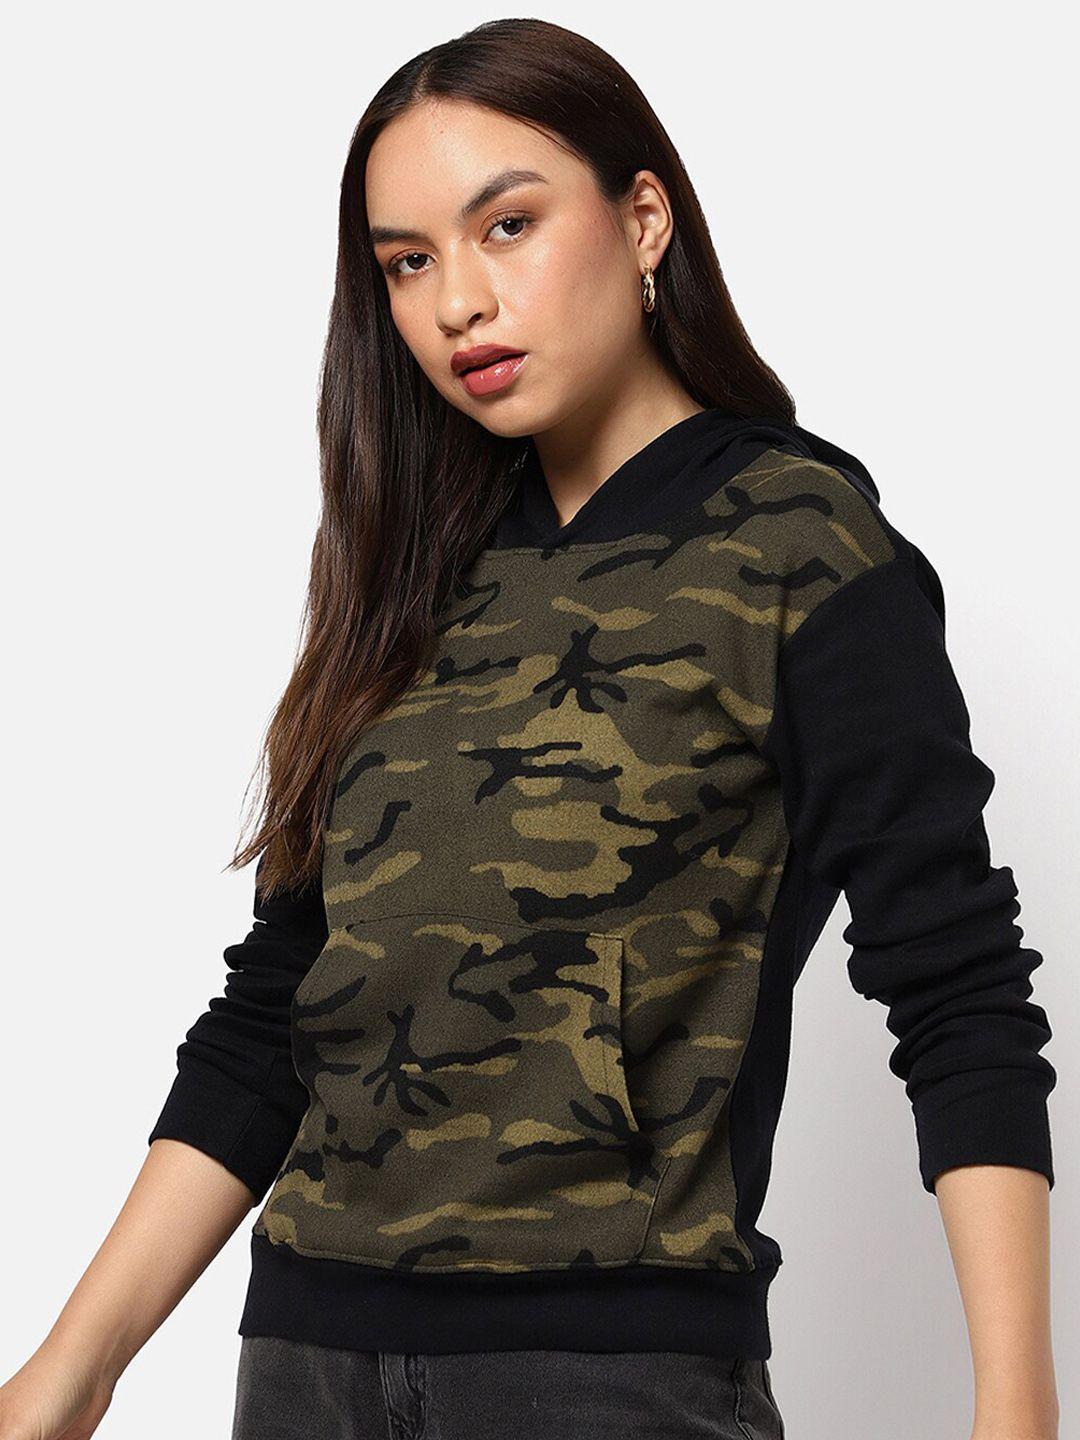 campus-sutra-women-olive-green-camouflage-printed-hooded-sweatshirt